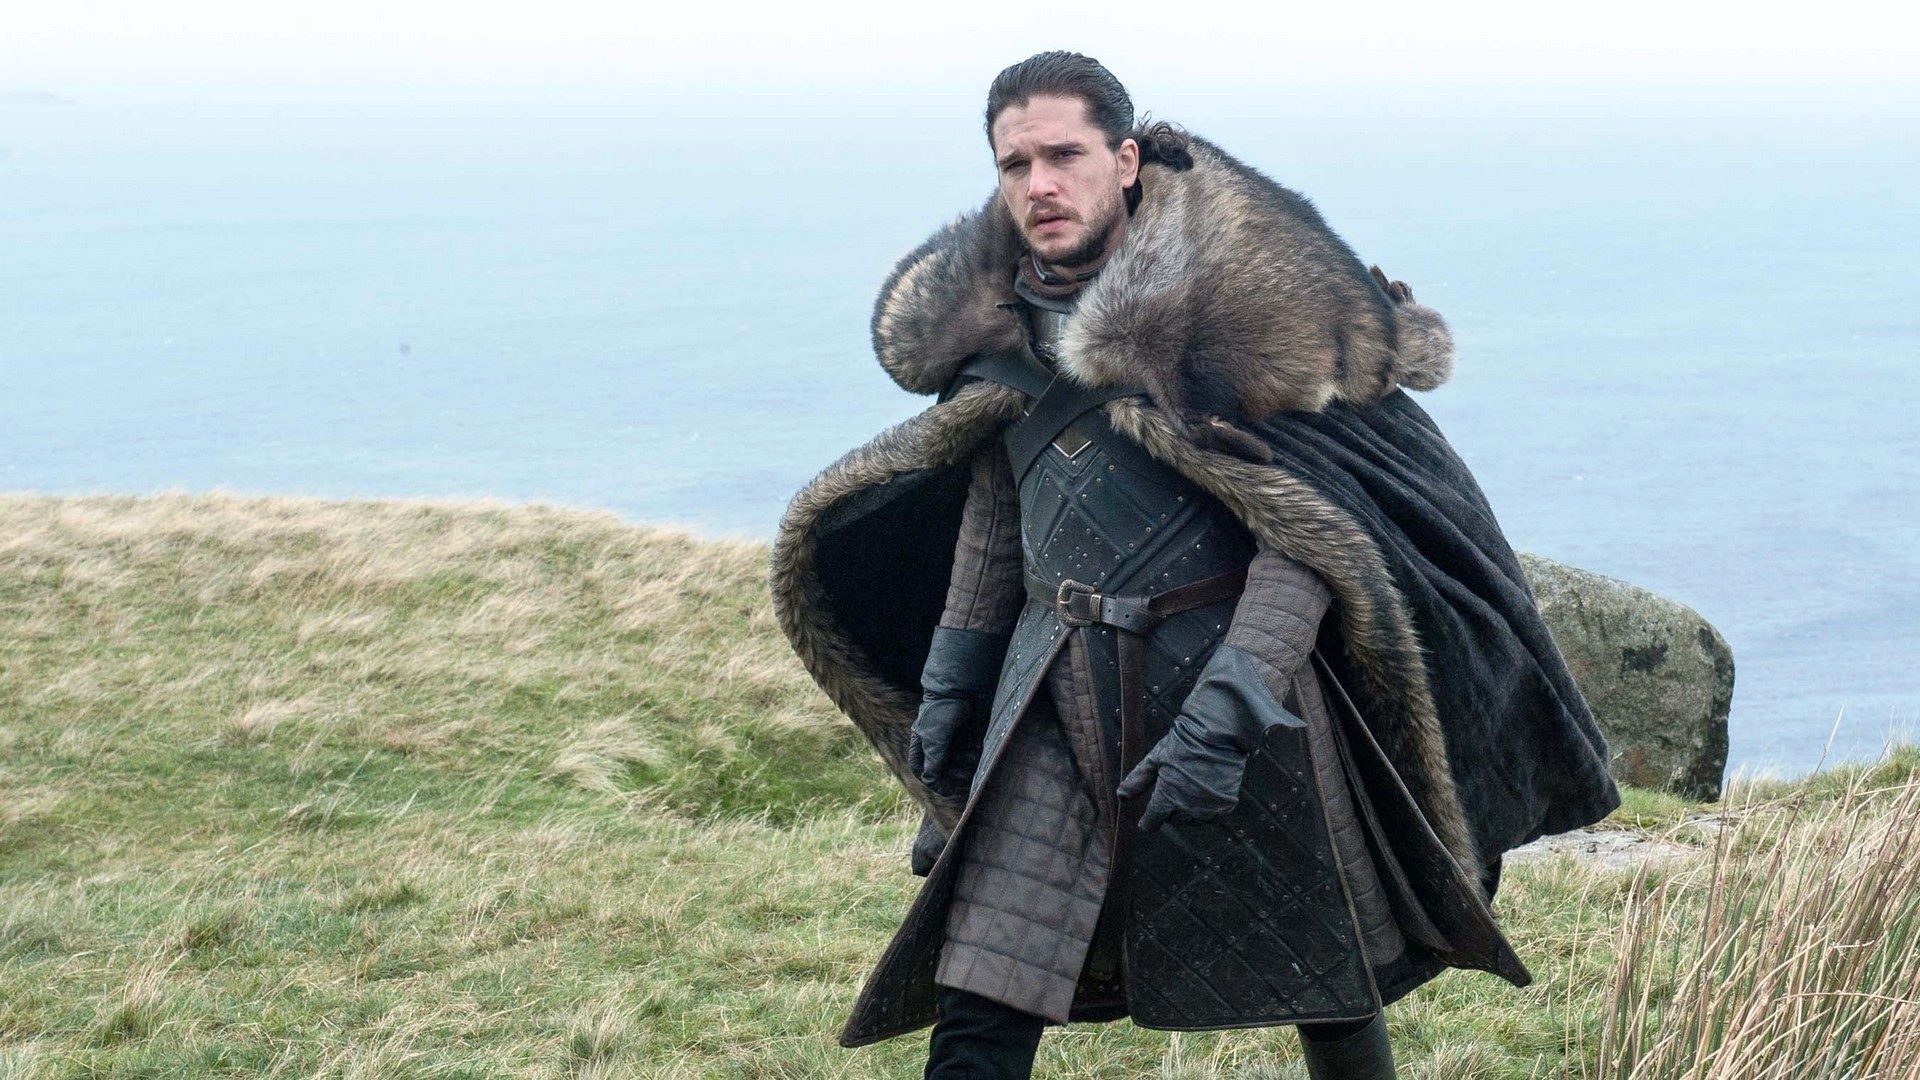 Game of Thrones Cast Kit Harington as Jon Snow Wallpaper with high-resolution 1920x1080 pixel. You can use this poster wallpaper for your Desktop Computers, Mac Screensavers, Windows Backgrounds, iPhone Wallpapers, Tablet or Android Lock screen and another Mobile device